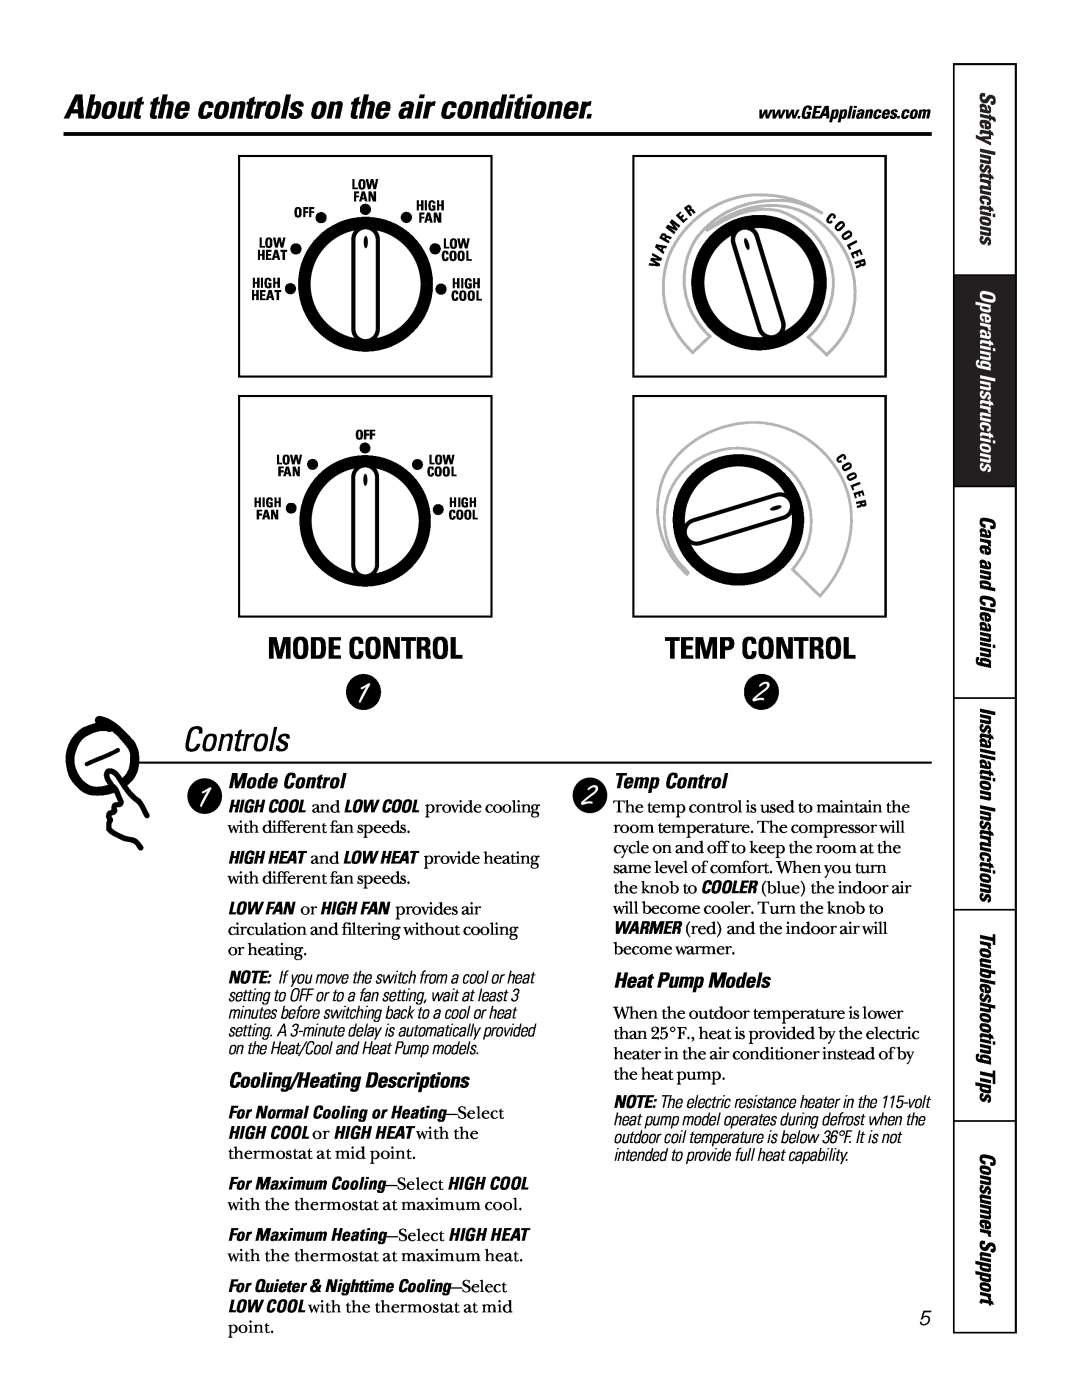 GE 10 DCA About the controls on the air conditioner, Controls, Temp Control, Safety, Mode Control, Heat Pump Models 